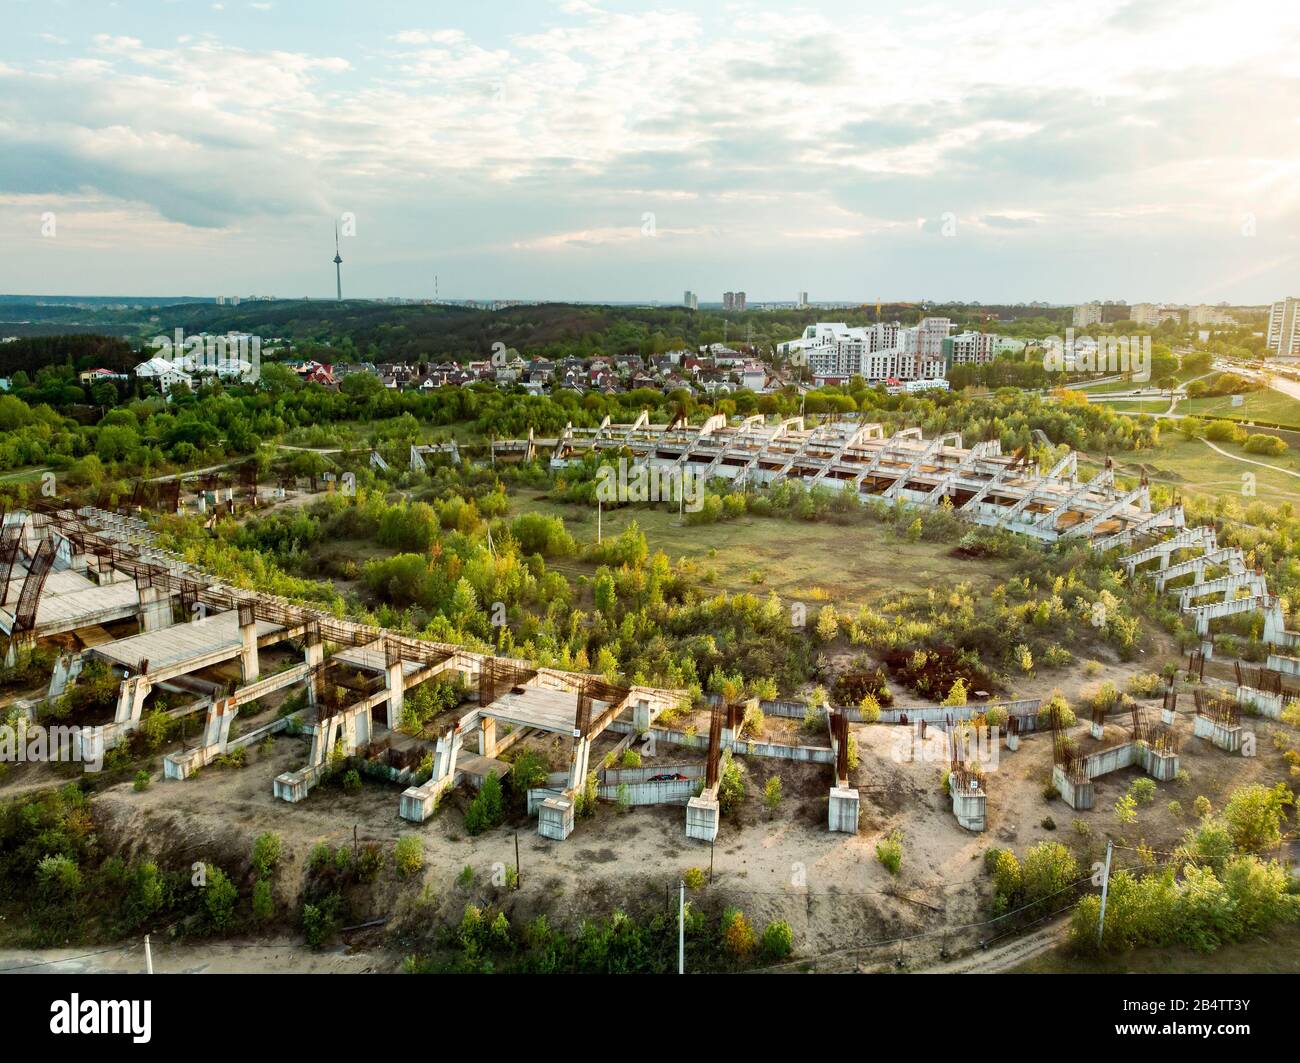 Aerial view of abandoned stadium in Vilnius, Lithuania. Unfinished stadium project. Reinforced concrete structure. Stock Photo